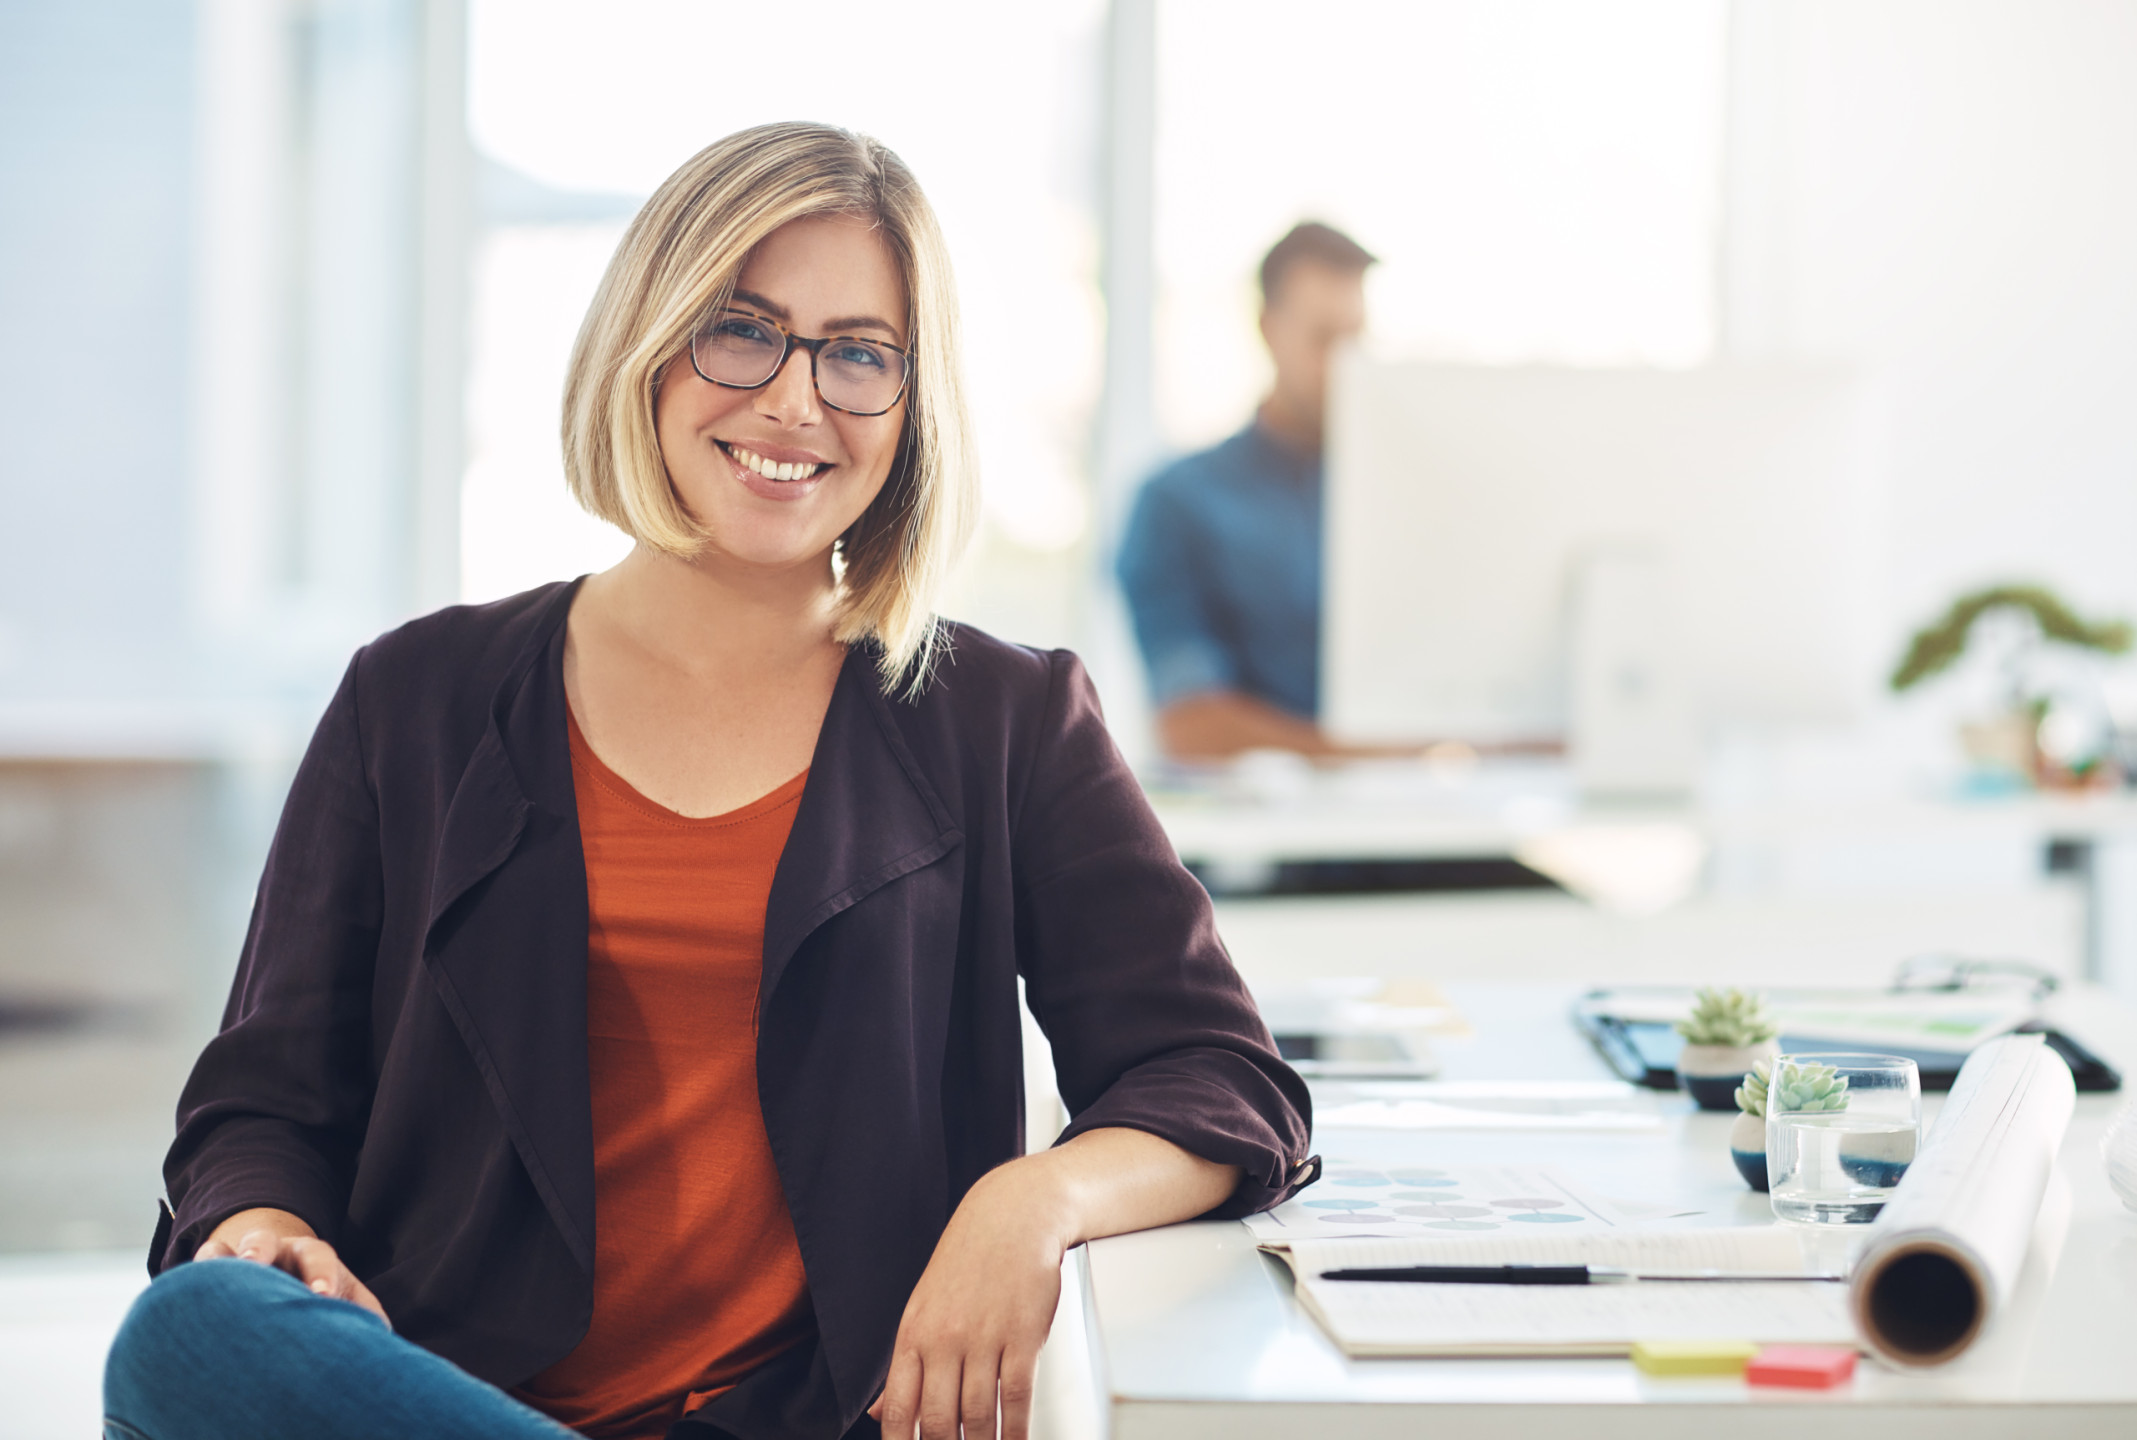 my-career-keeps-me-smiling-everyday-portrait-young-woman-working-her-desk-modern-office